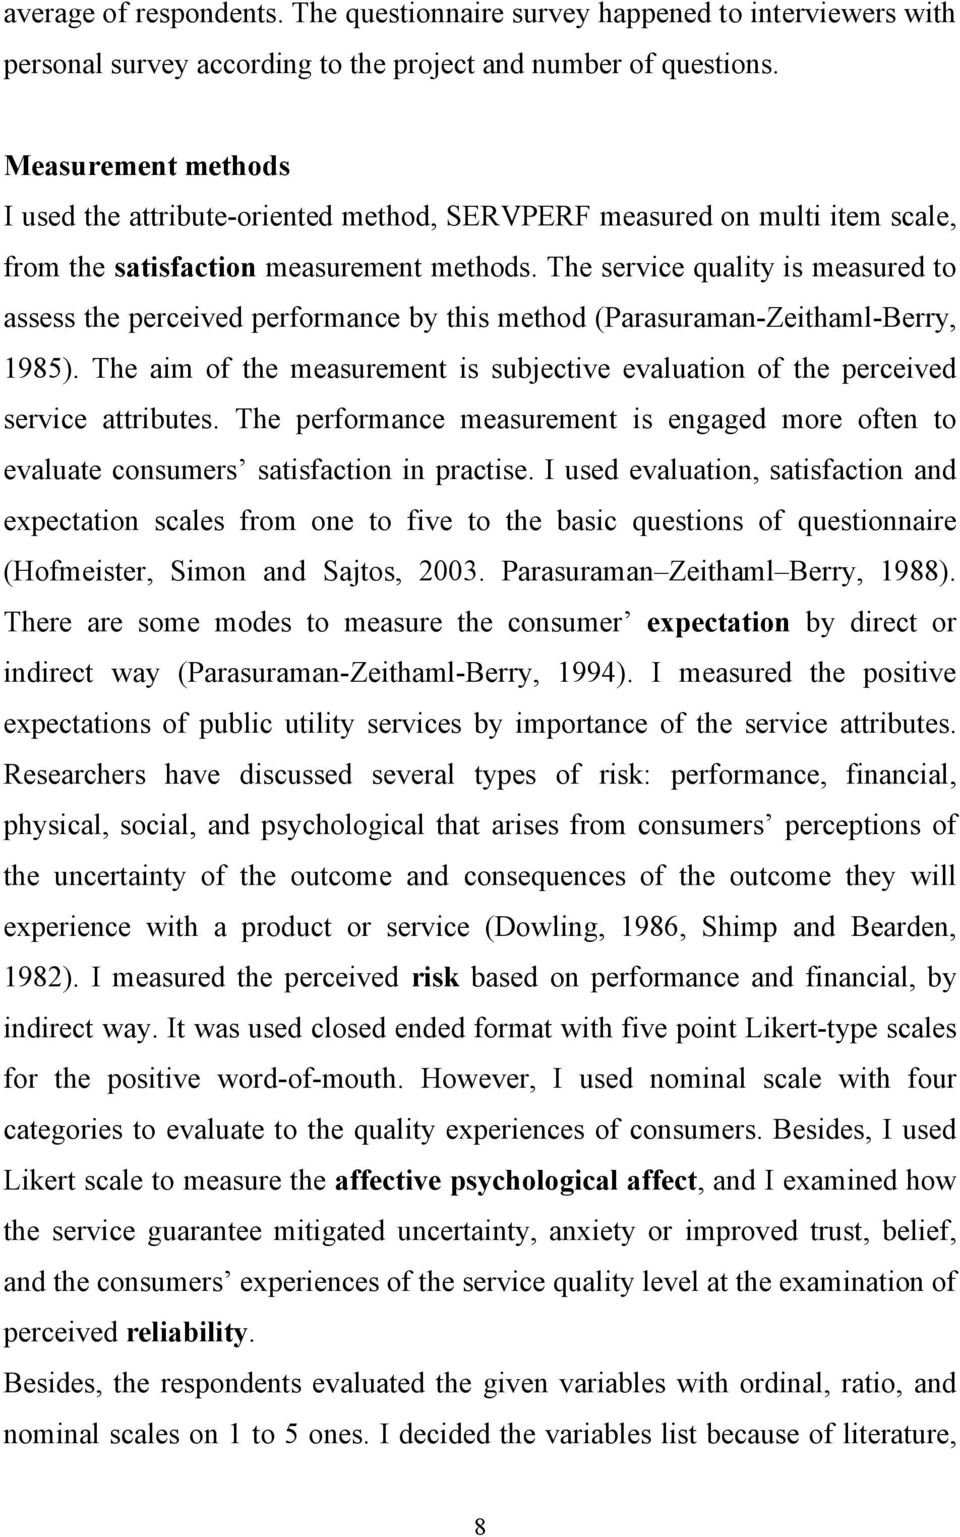 The service quality is measured to assess the perceived performance by this method (Parasuraman-Zeithaml-Berry, 1985).